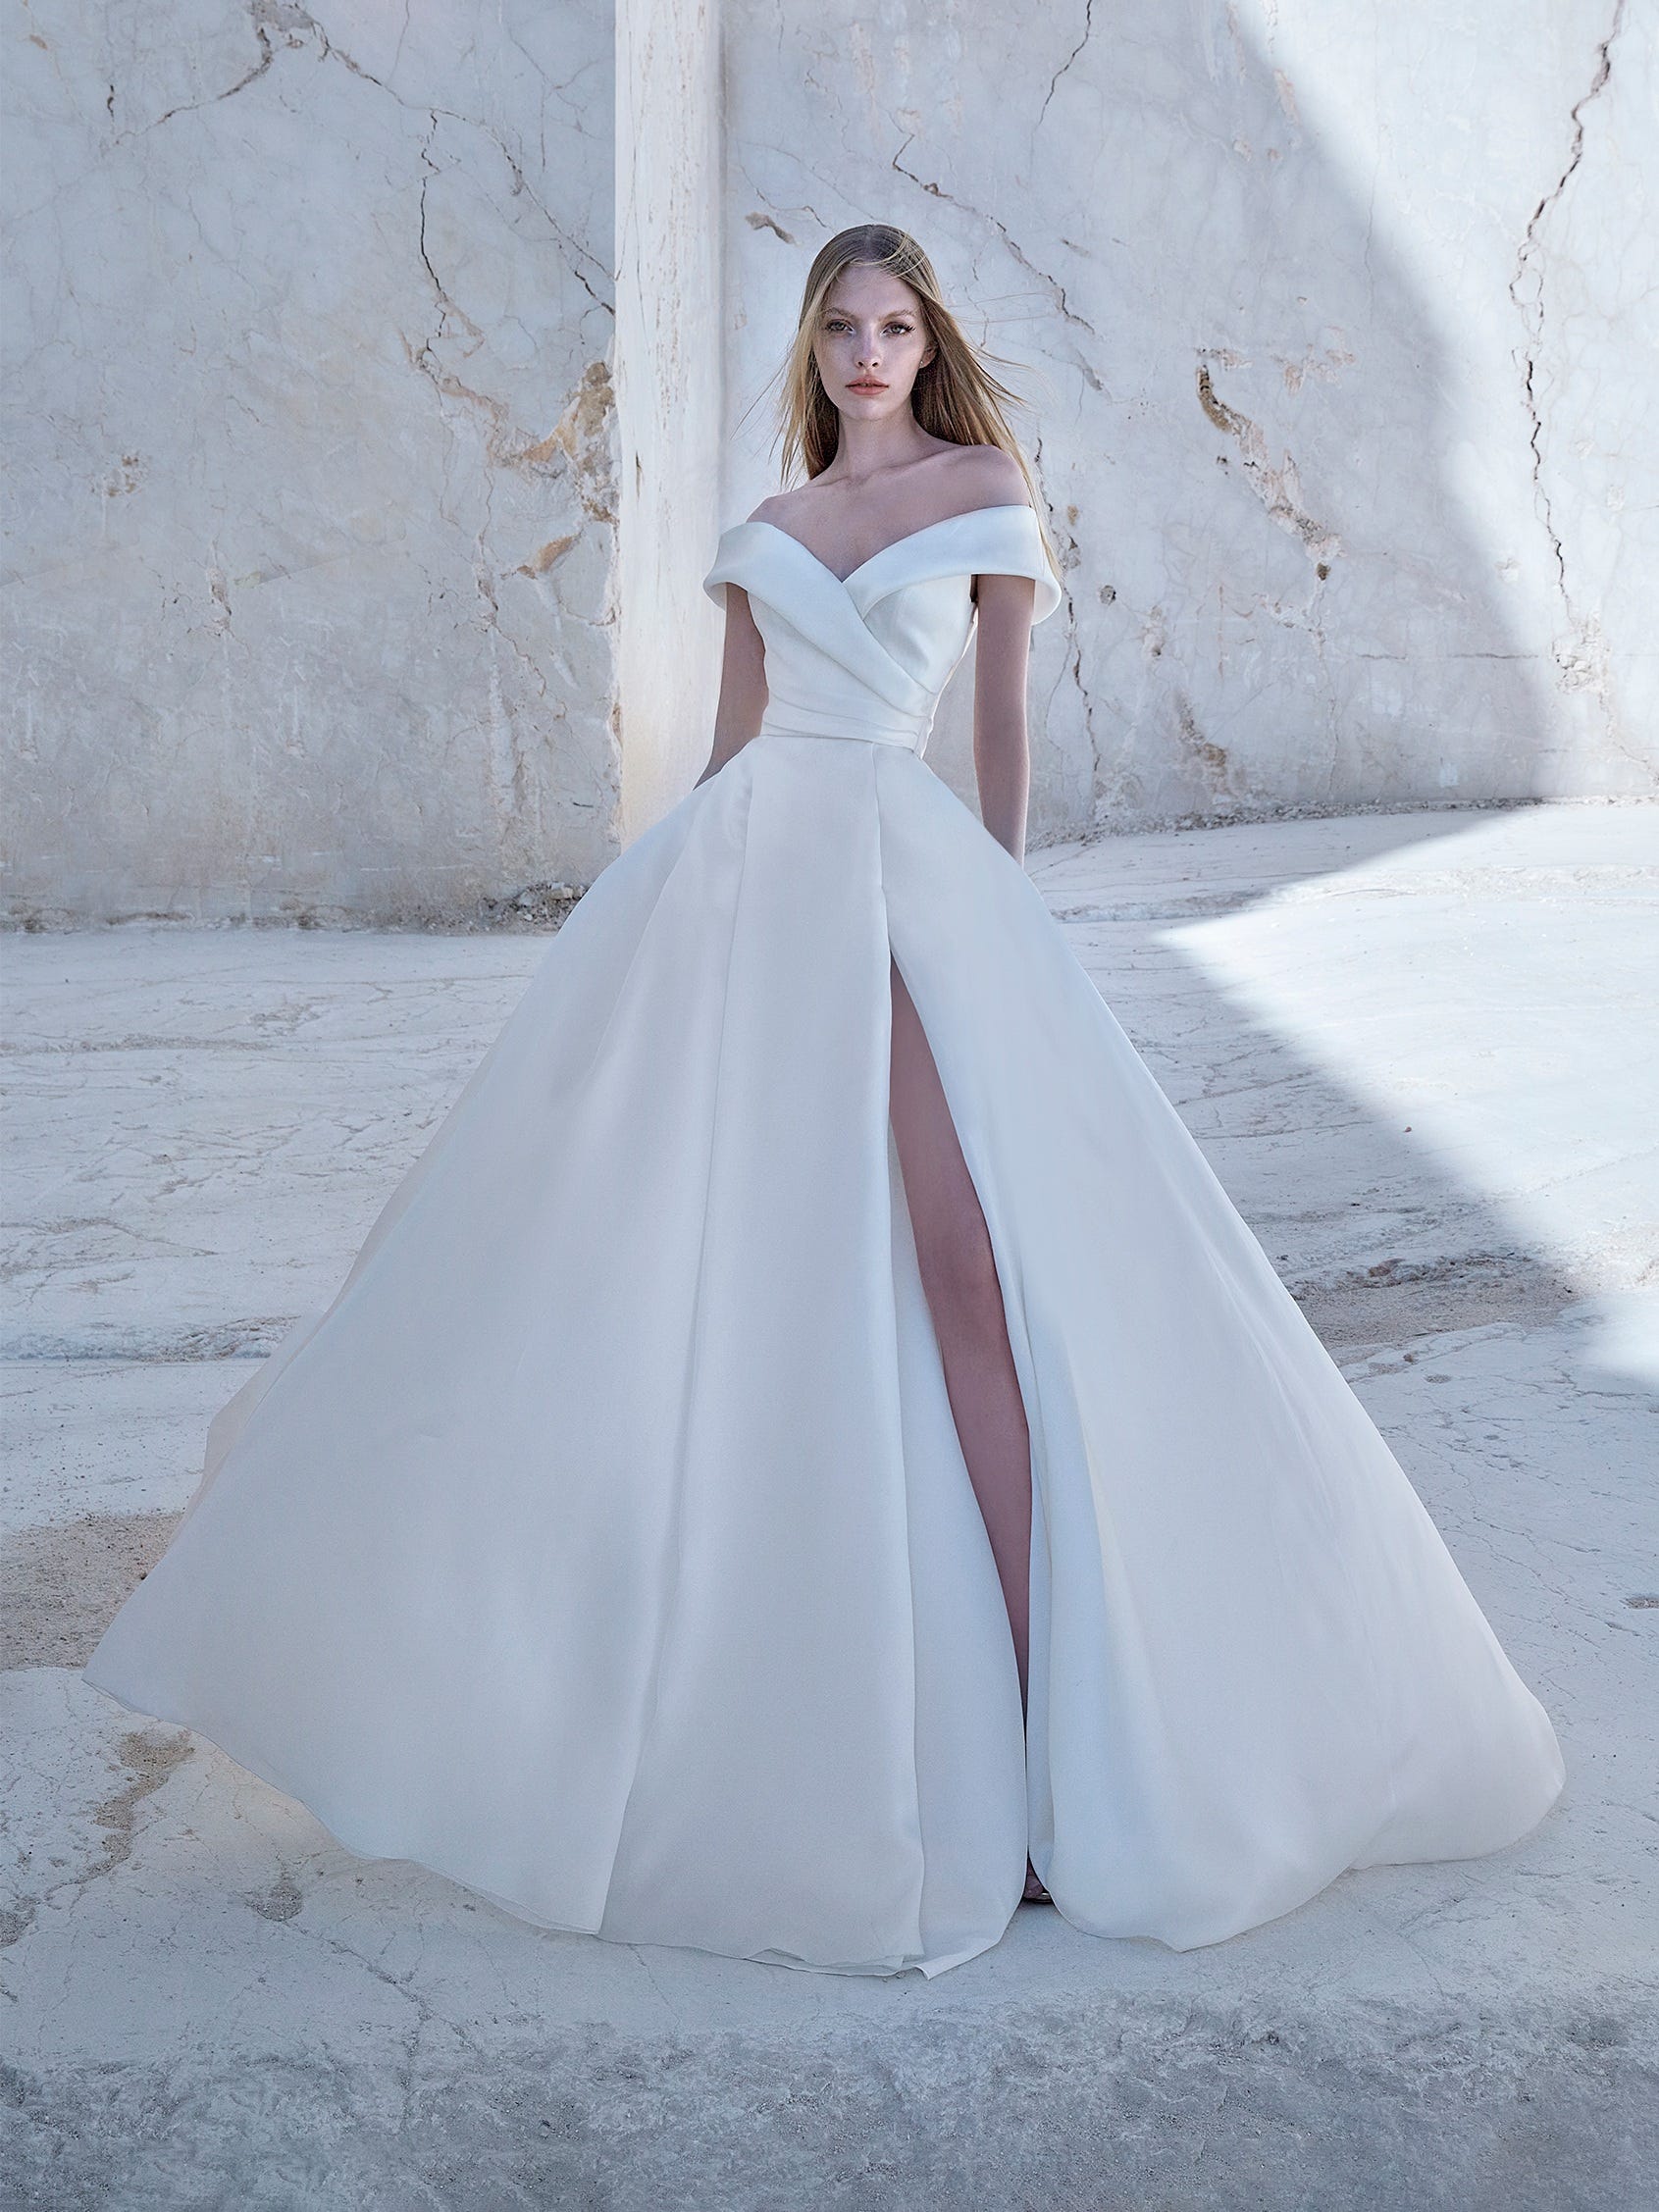 Show Off Your Shoulders: 13 Amazing Strapless Wedding Dresses